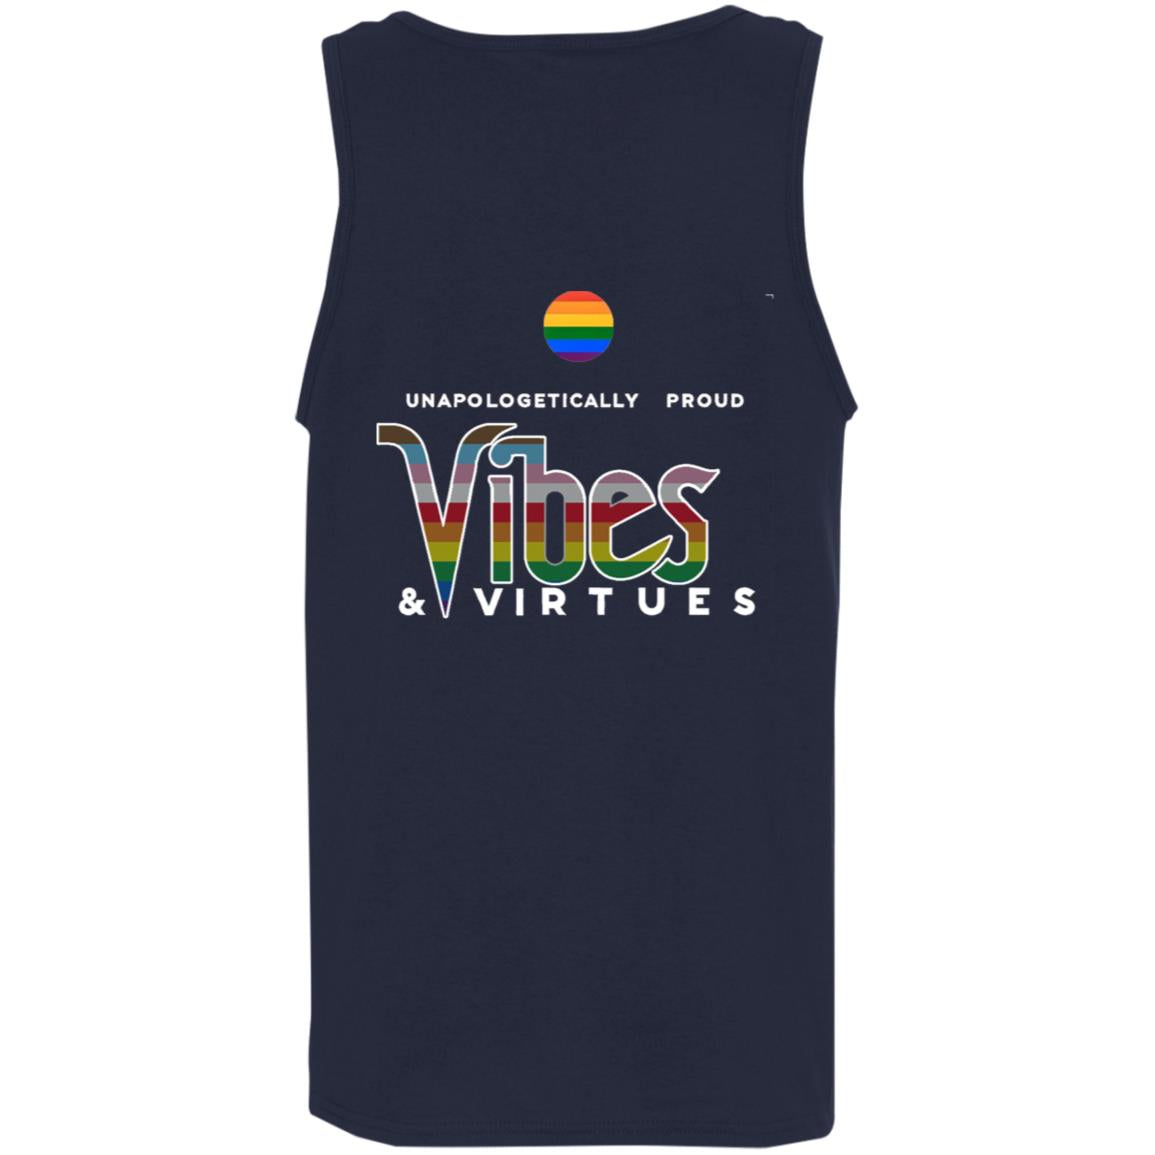 Unapologetically Proud Tank Top